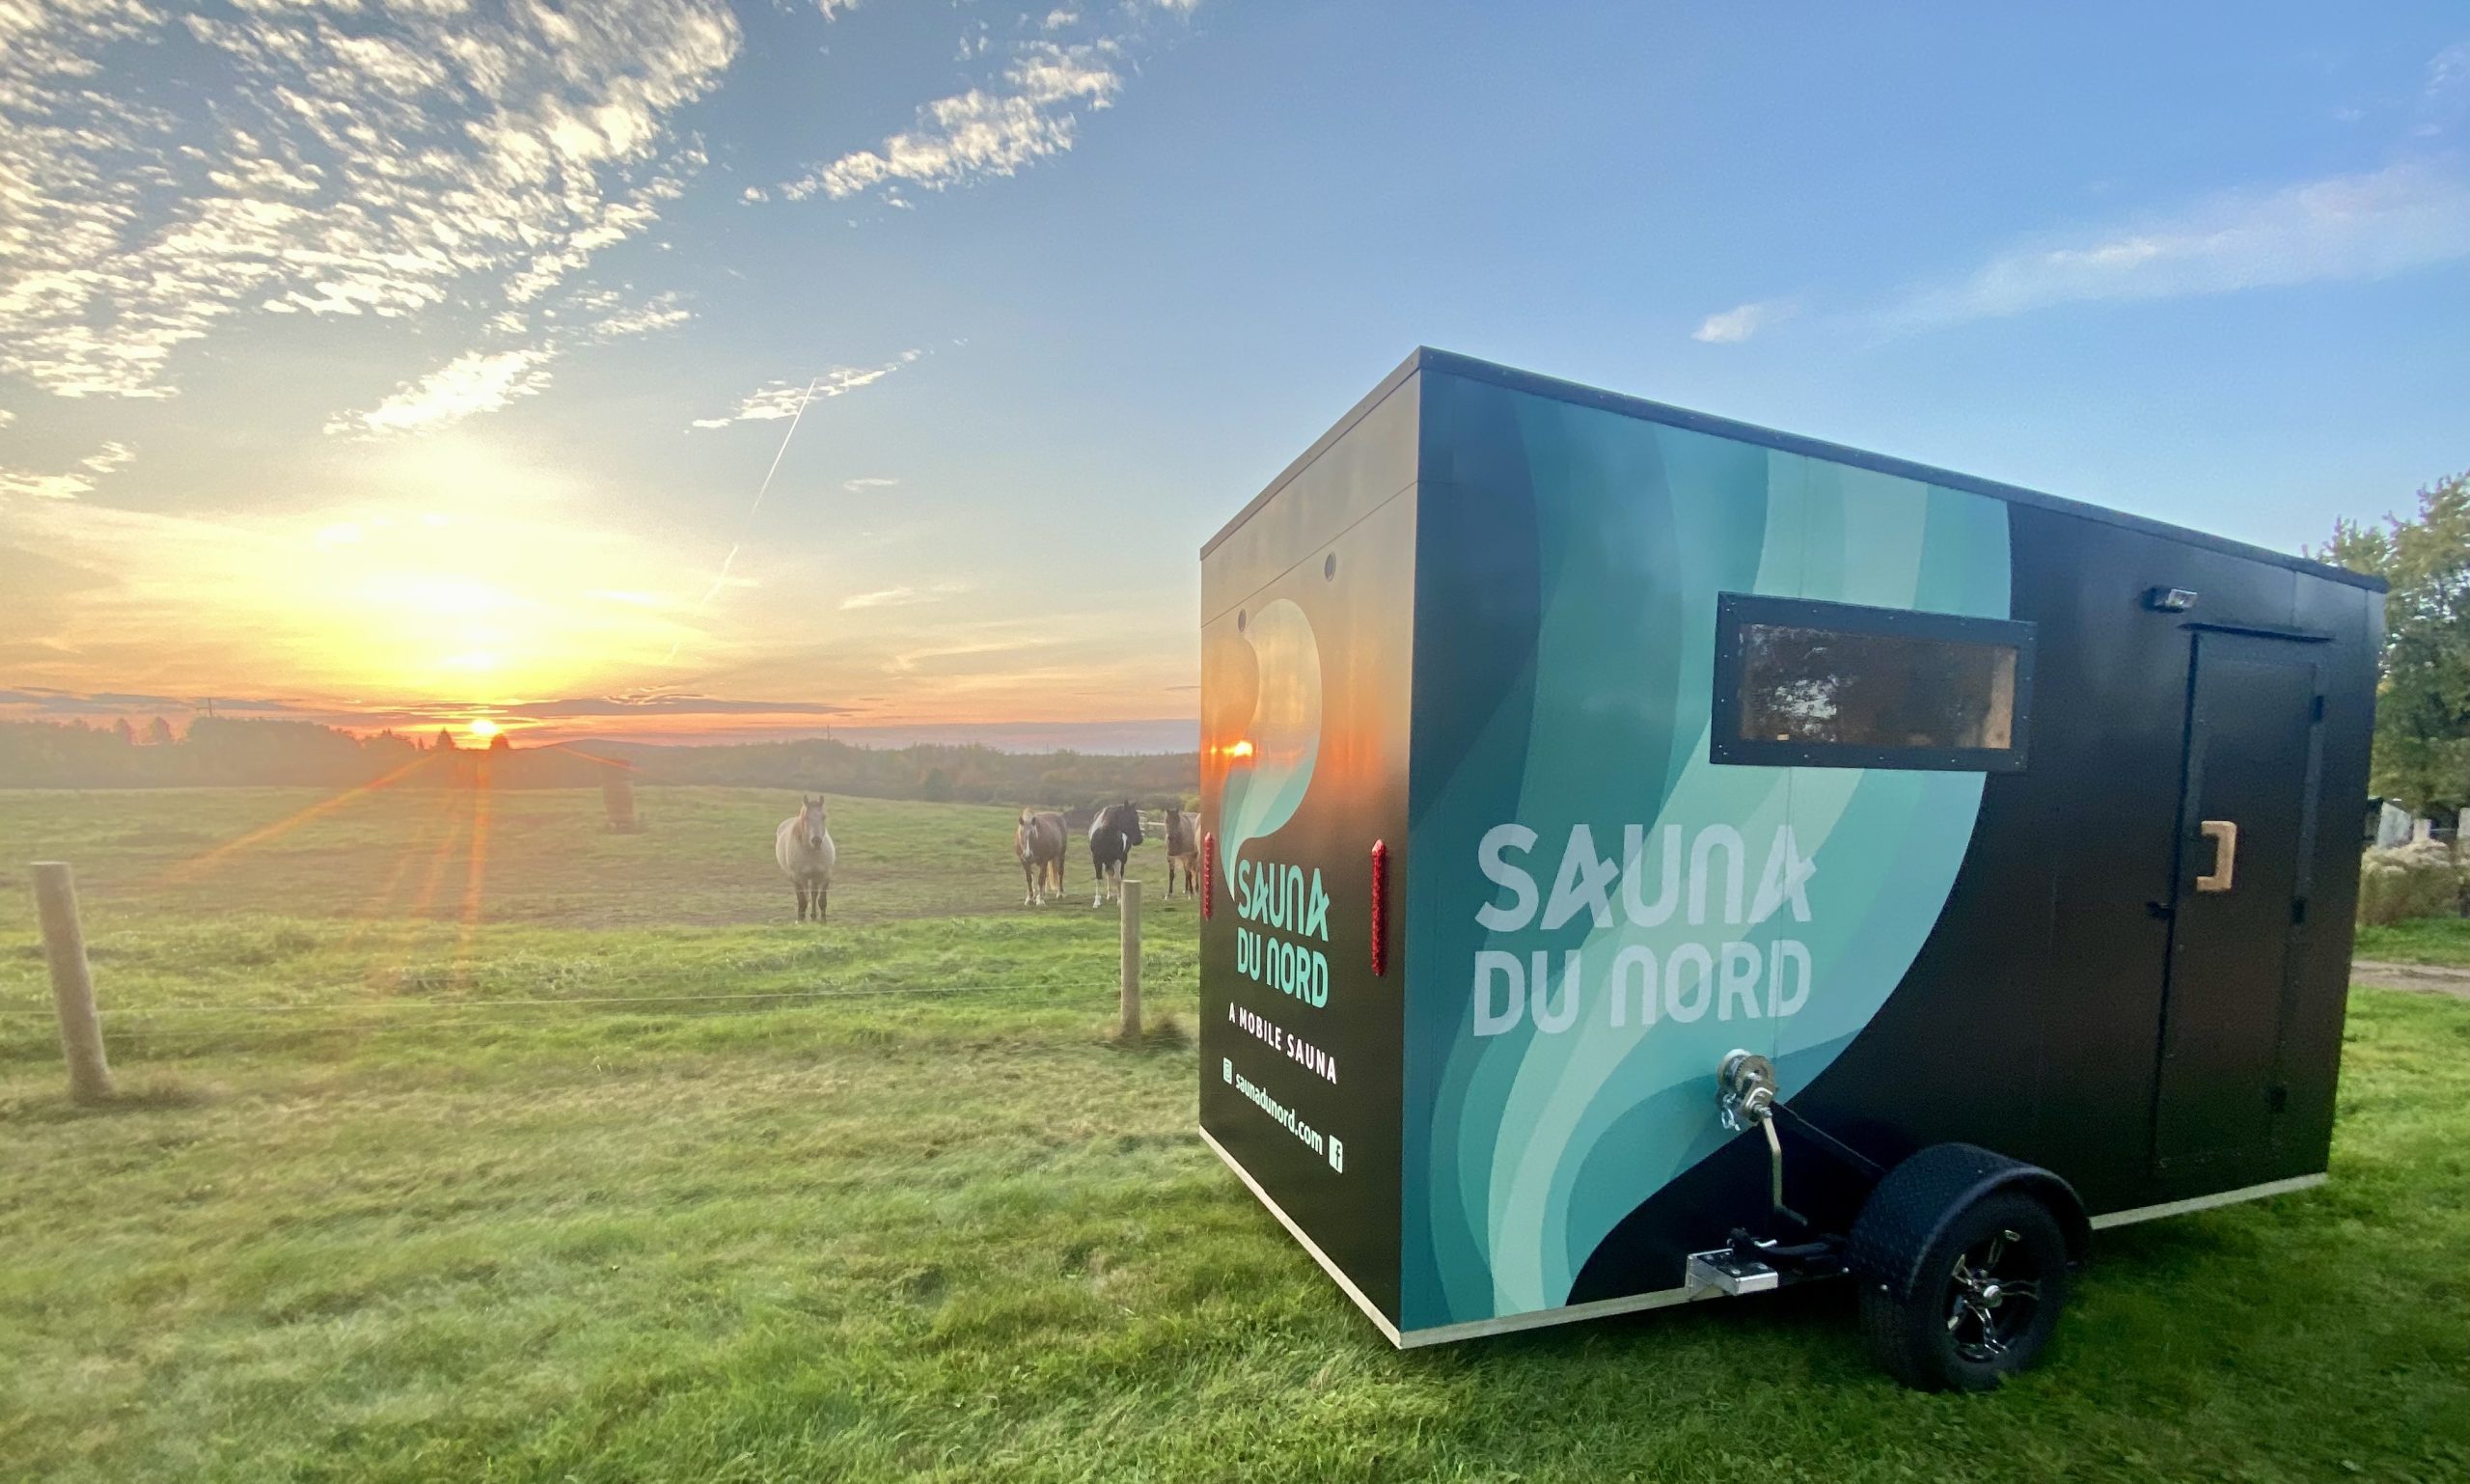 sauna du nord mobile sauna by sunrise and horses in pastoral setting